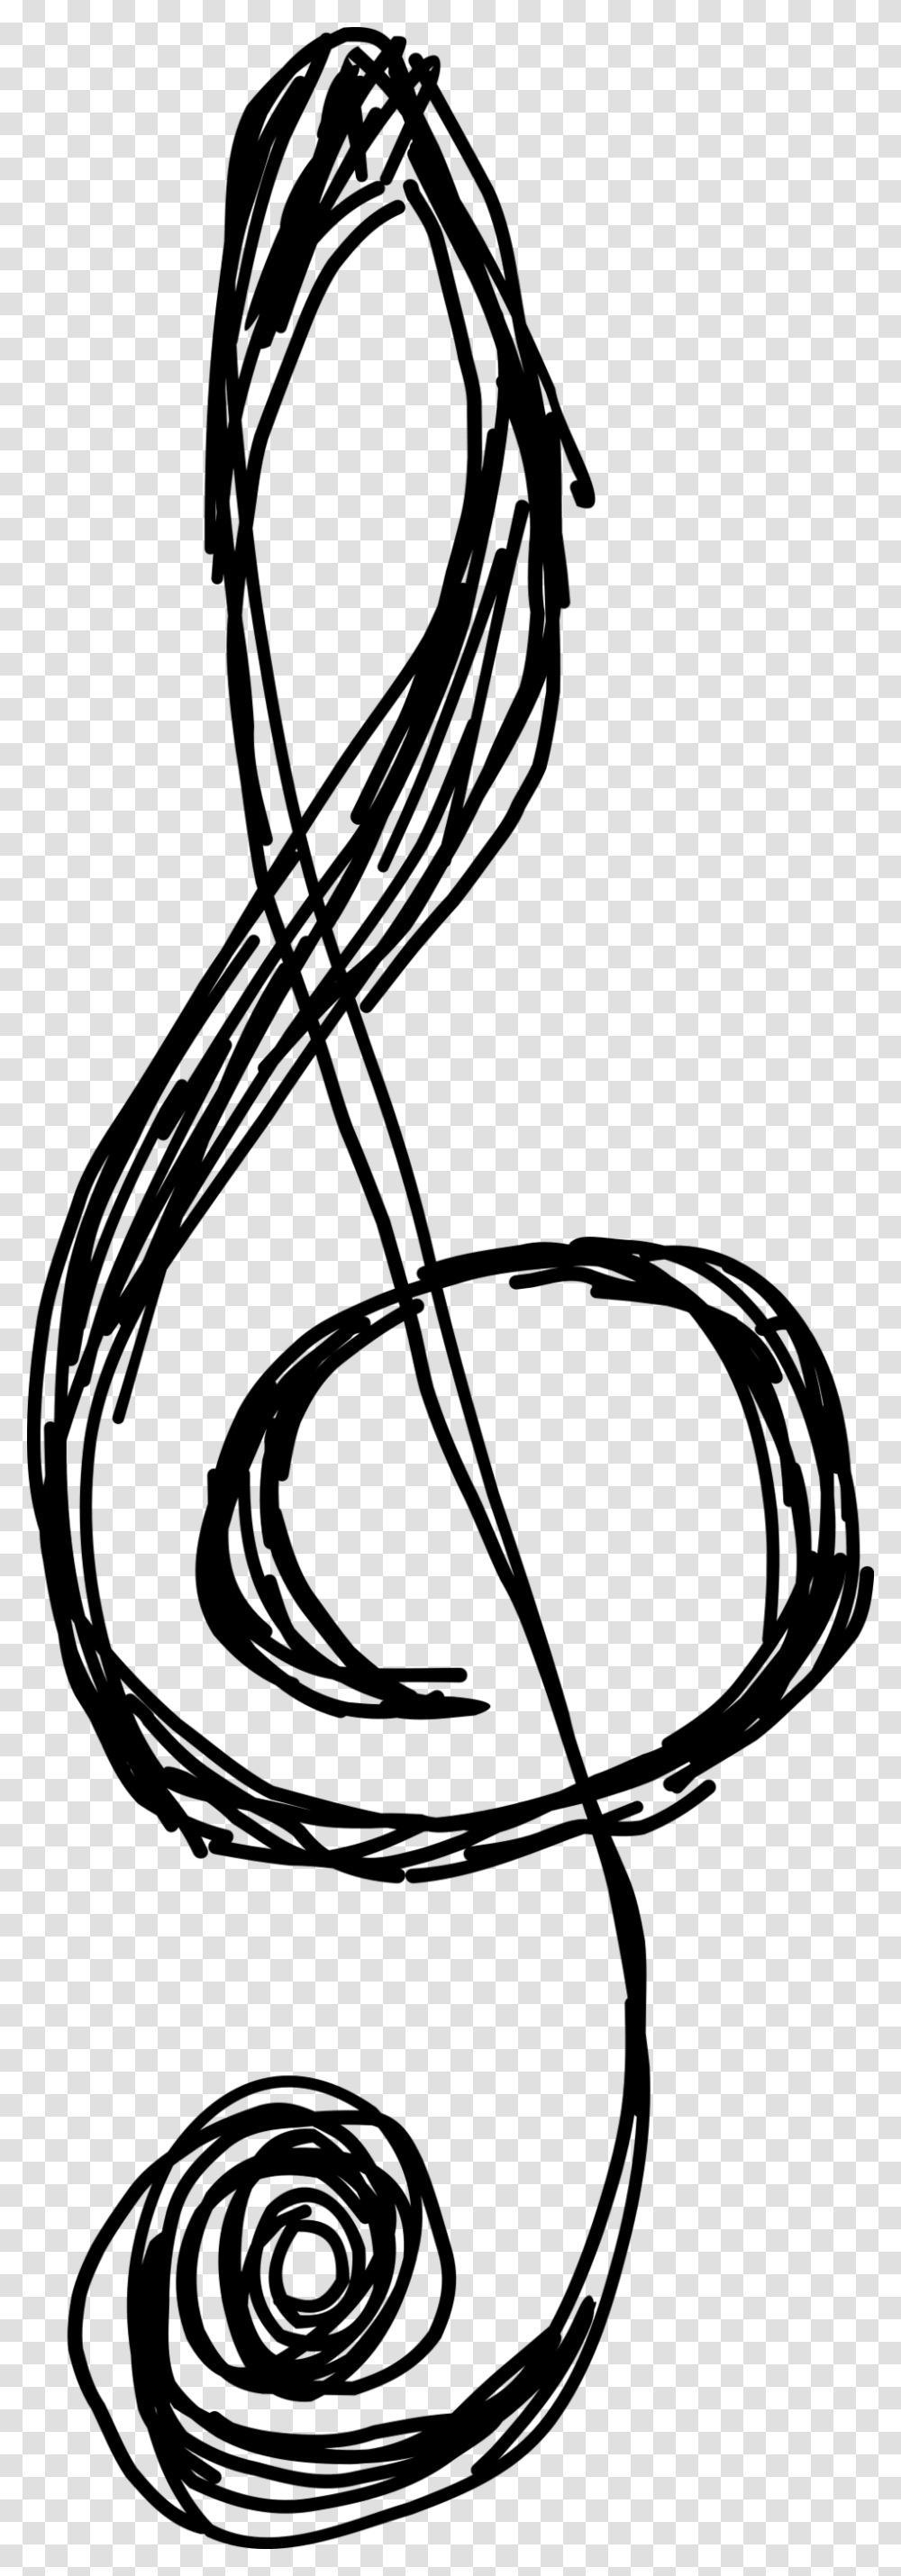 Treble Clef Free Stock Photo Illustration Of A Treble Clef, Gray, World Of Warcraft Transparent Png